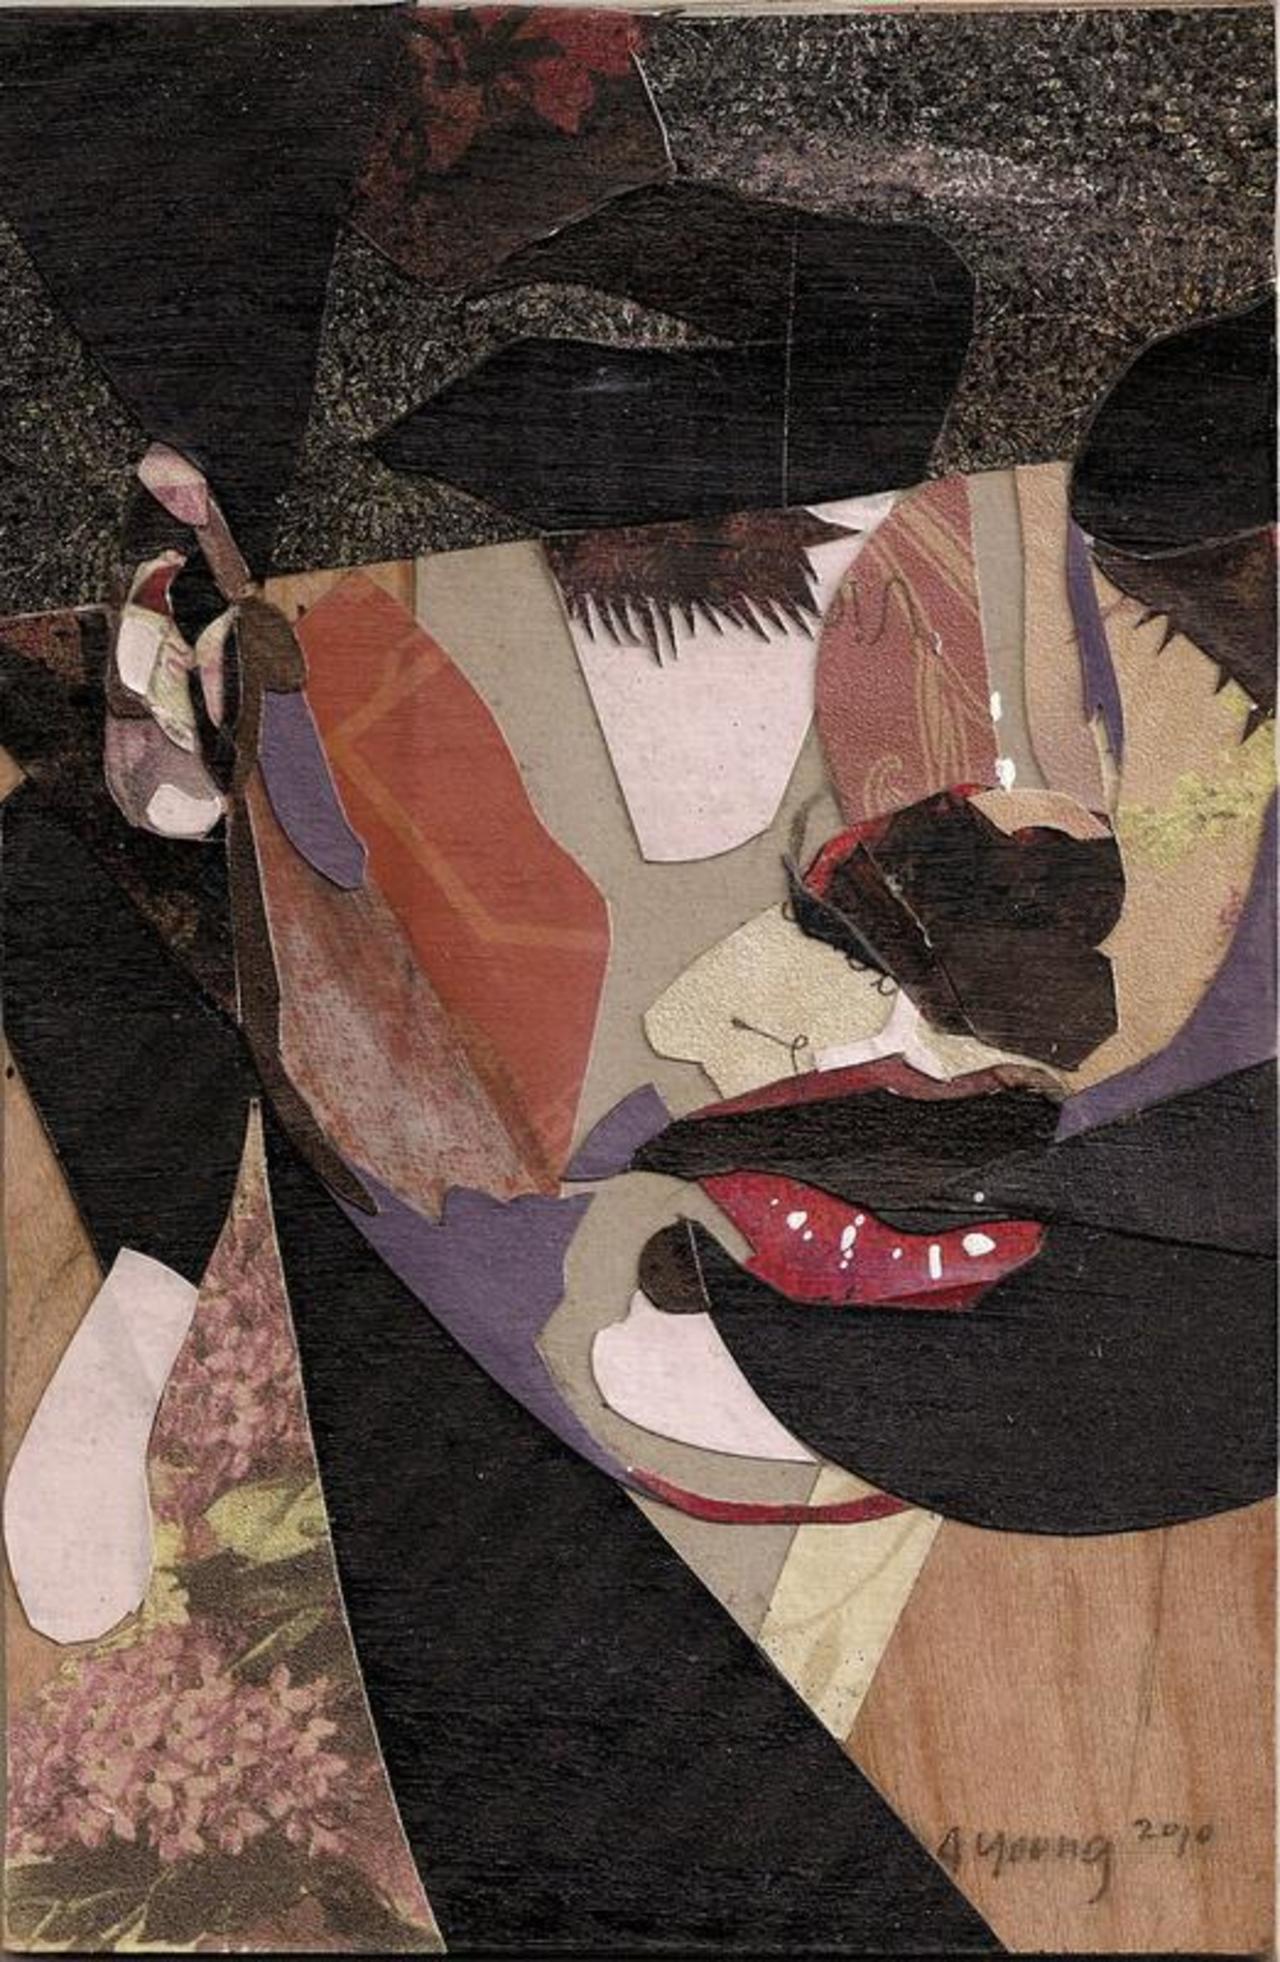 "@sweetlilmzmia: Isabelle | by Drew Young (Mixed Media on Mahogany) /#Art #Collage #Portrait http://t.co/GnS44I1oxk" Very Good